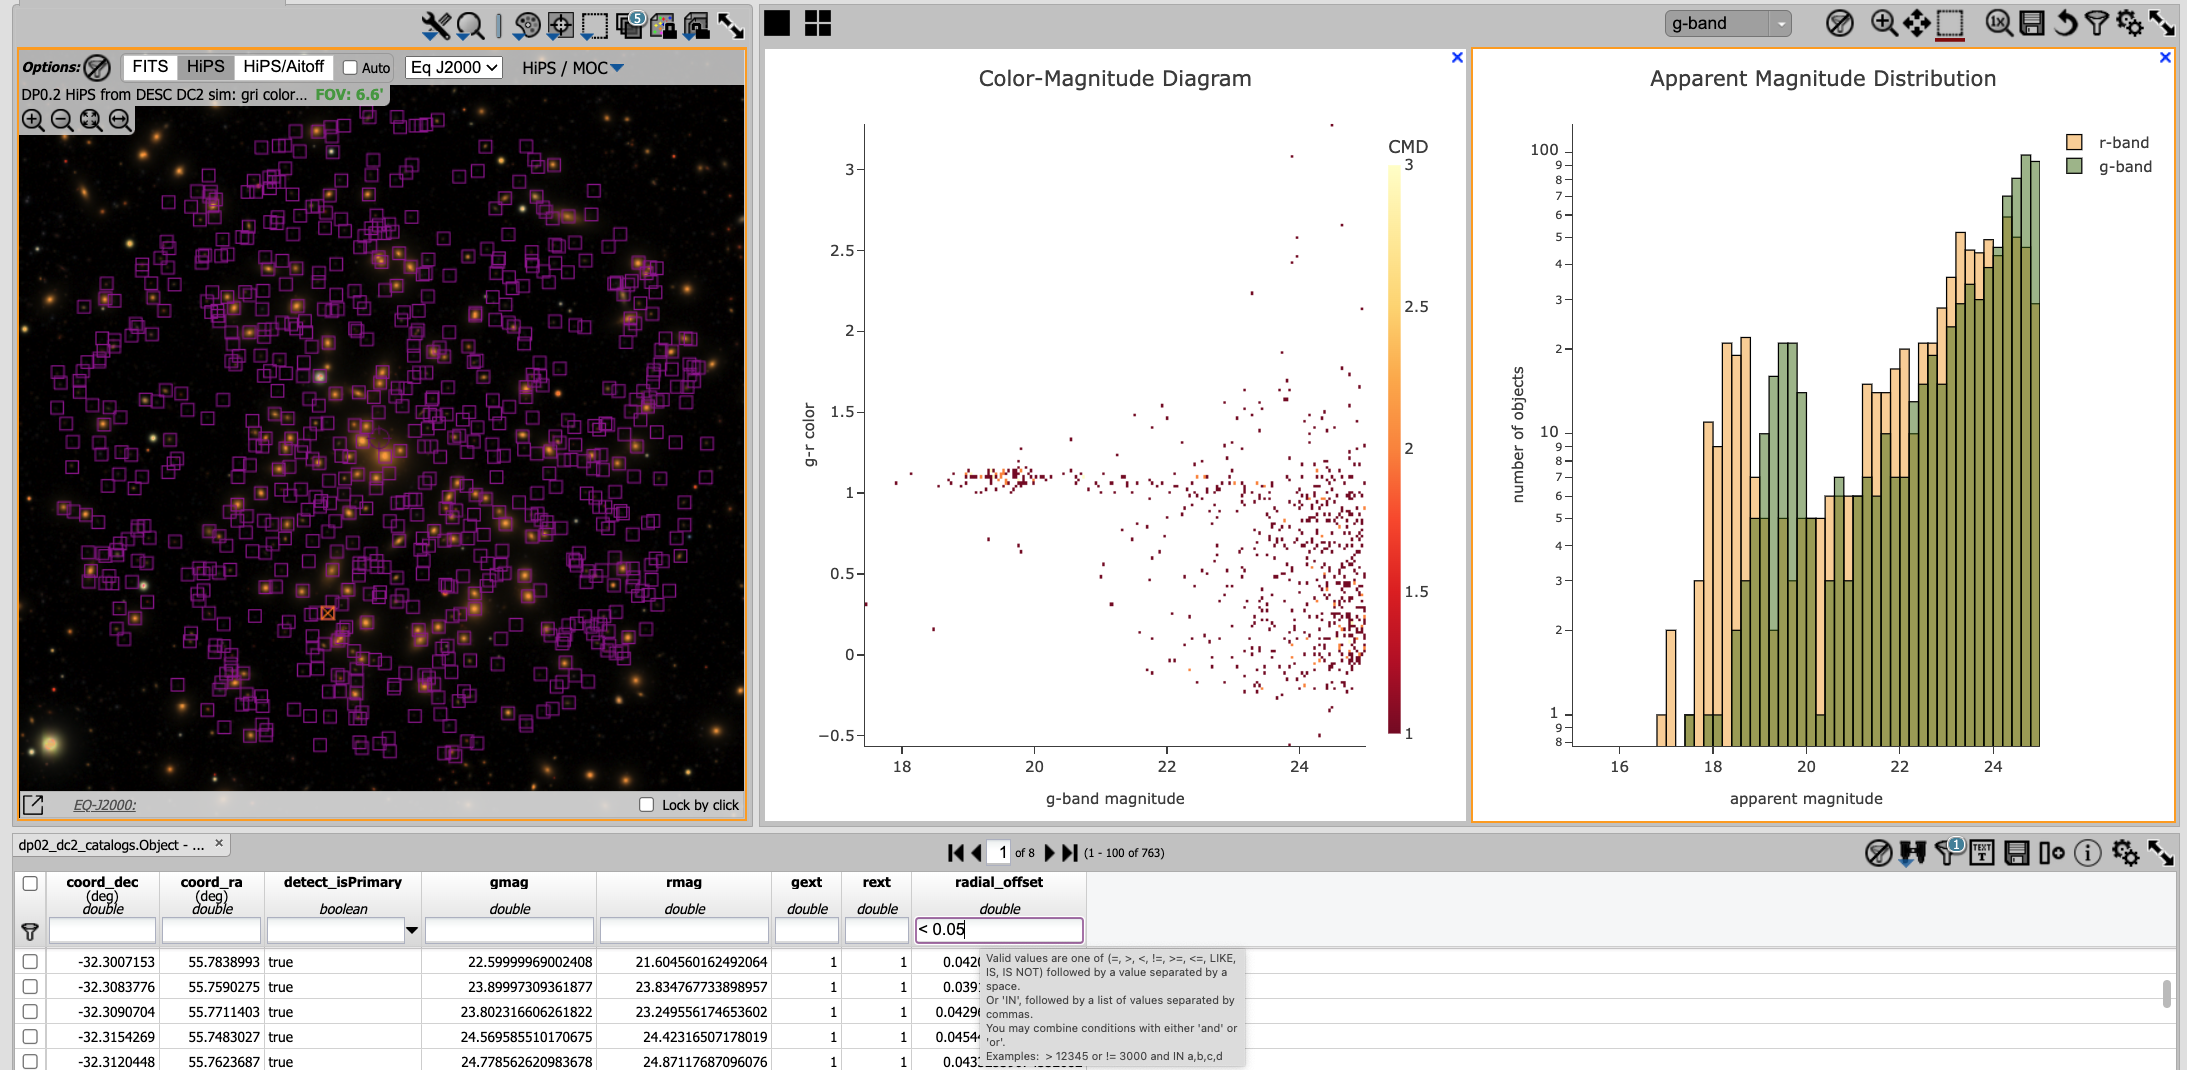 A screenshot of the portal's results view showing both the color-magnitude heatmap and the magnitude histograms for all galaxies within 0.03 degrees of the original search coordinates.